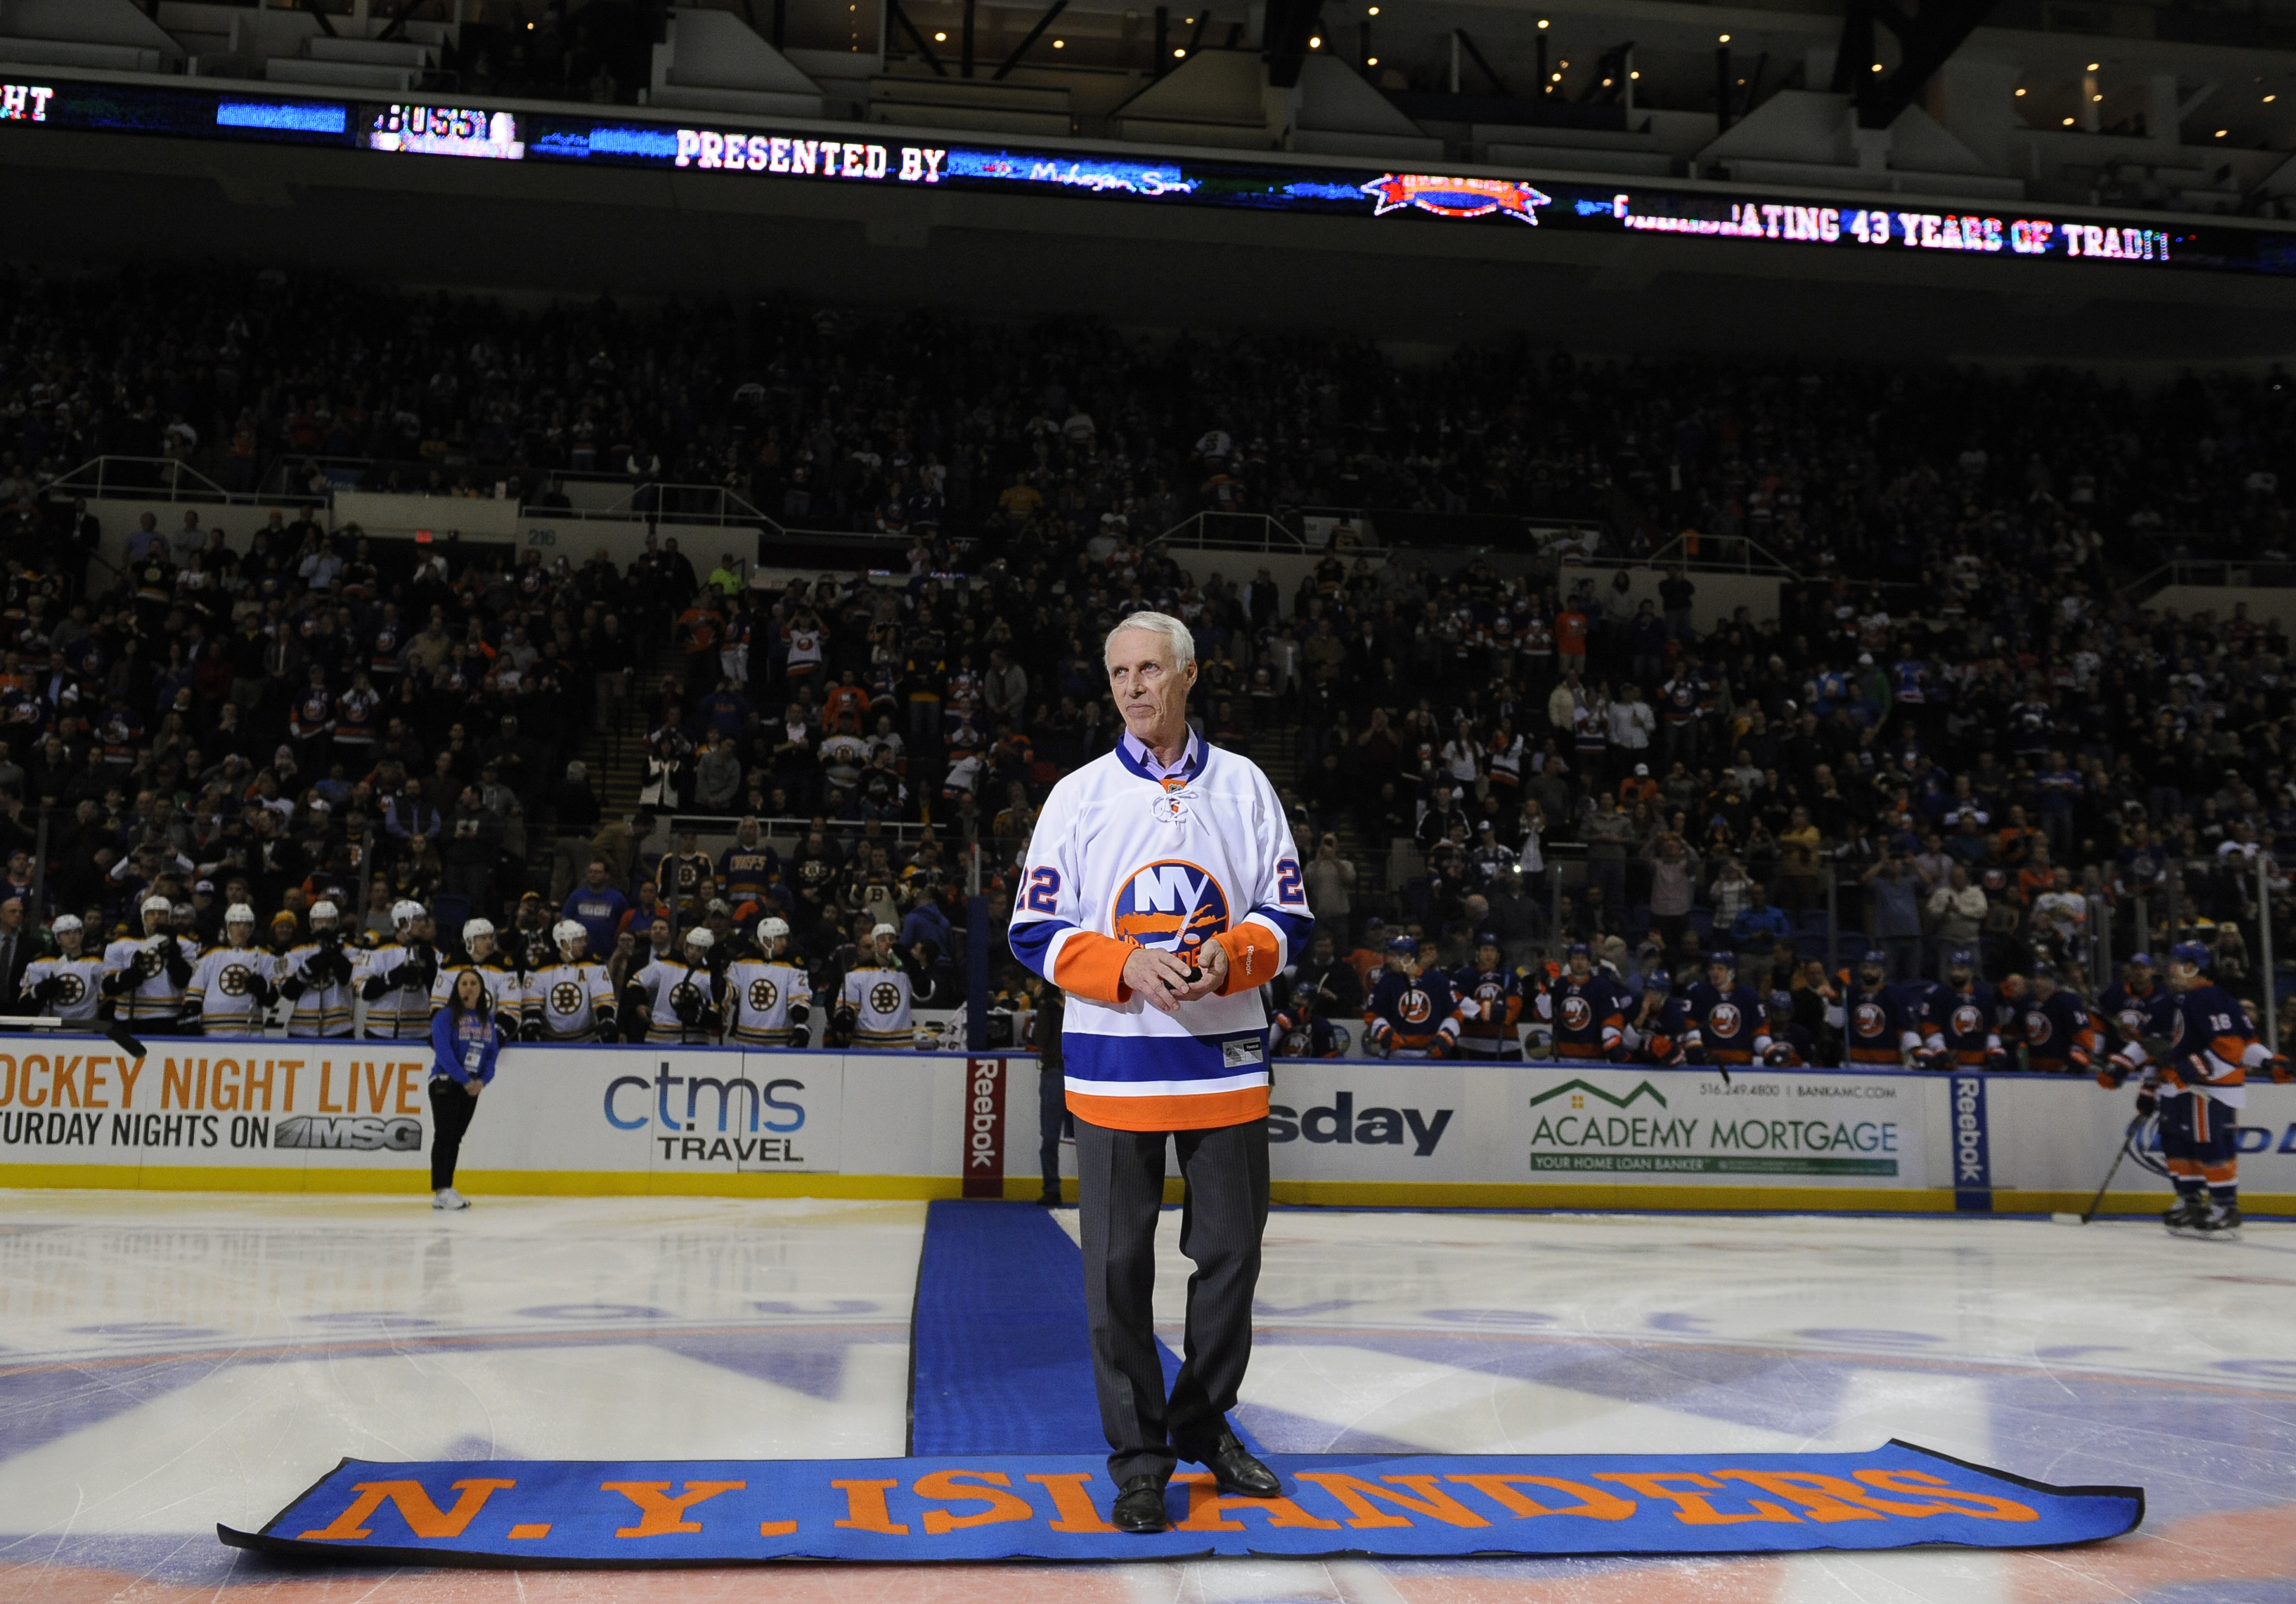 NY Islanders legend Bryan Trottier hired as TV analyst for